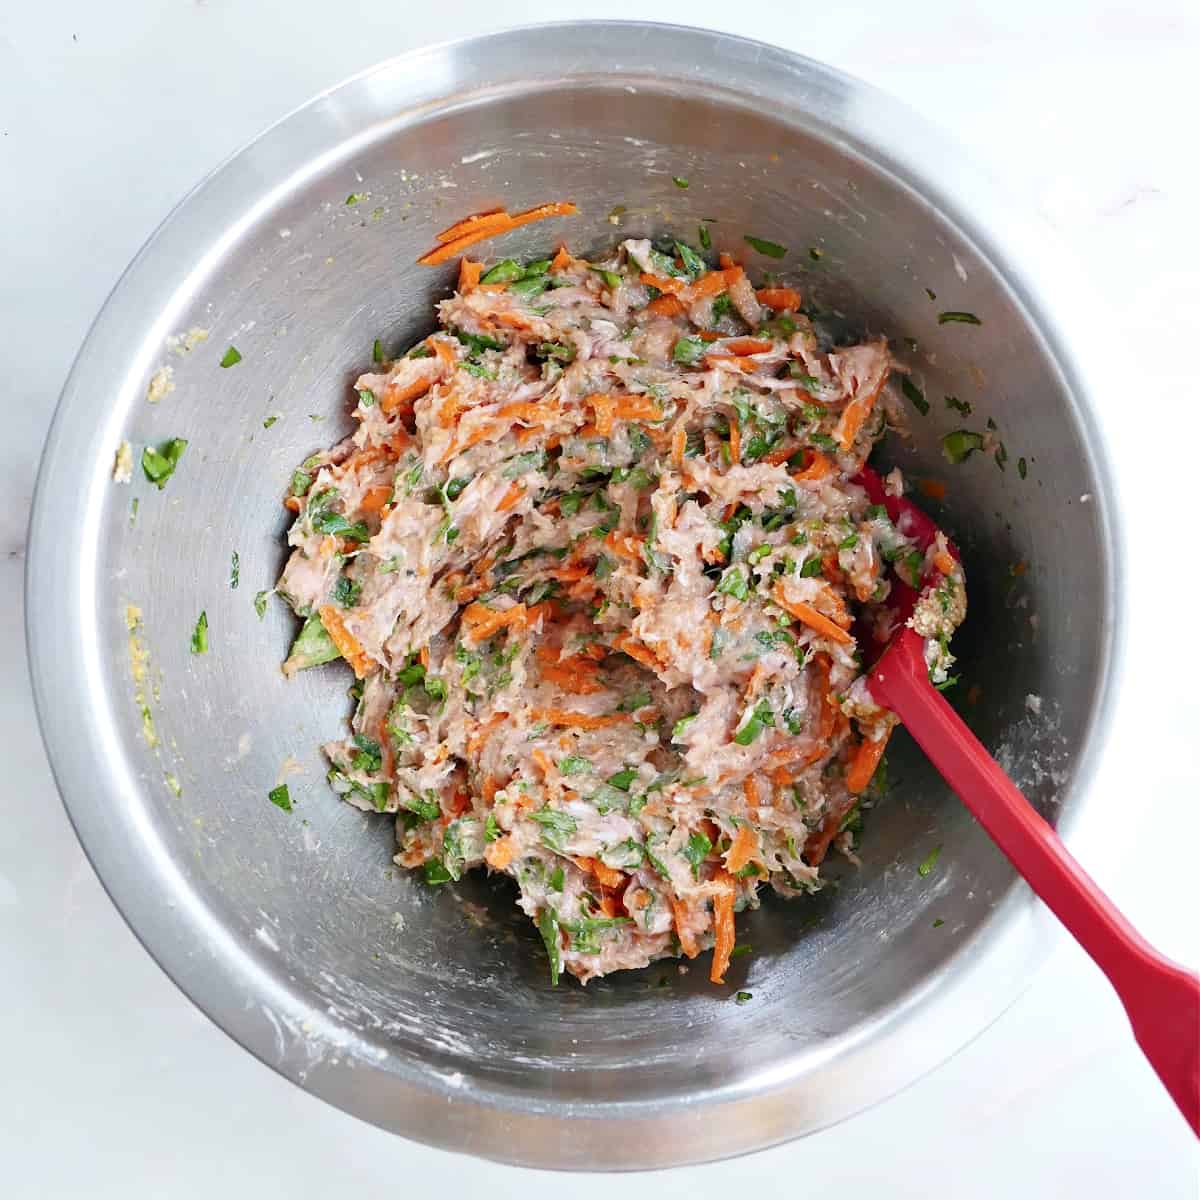 ground chicken mixed together with veggies and seasonings in a mixing bowl